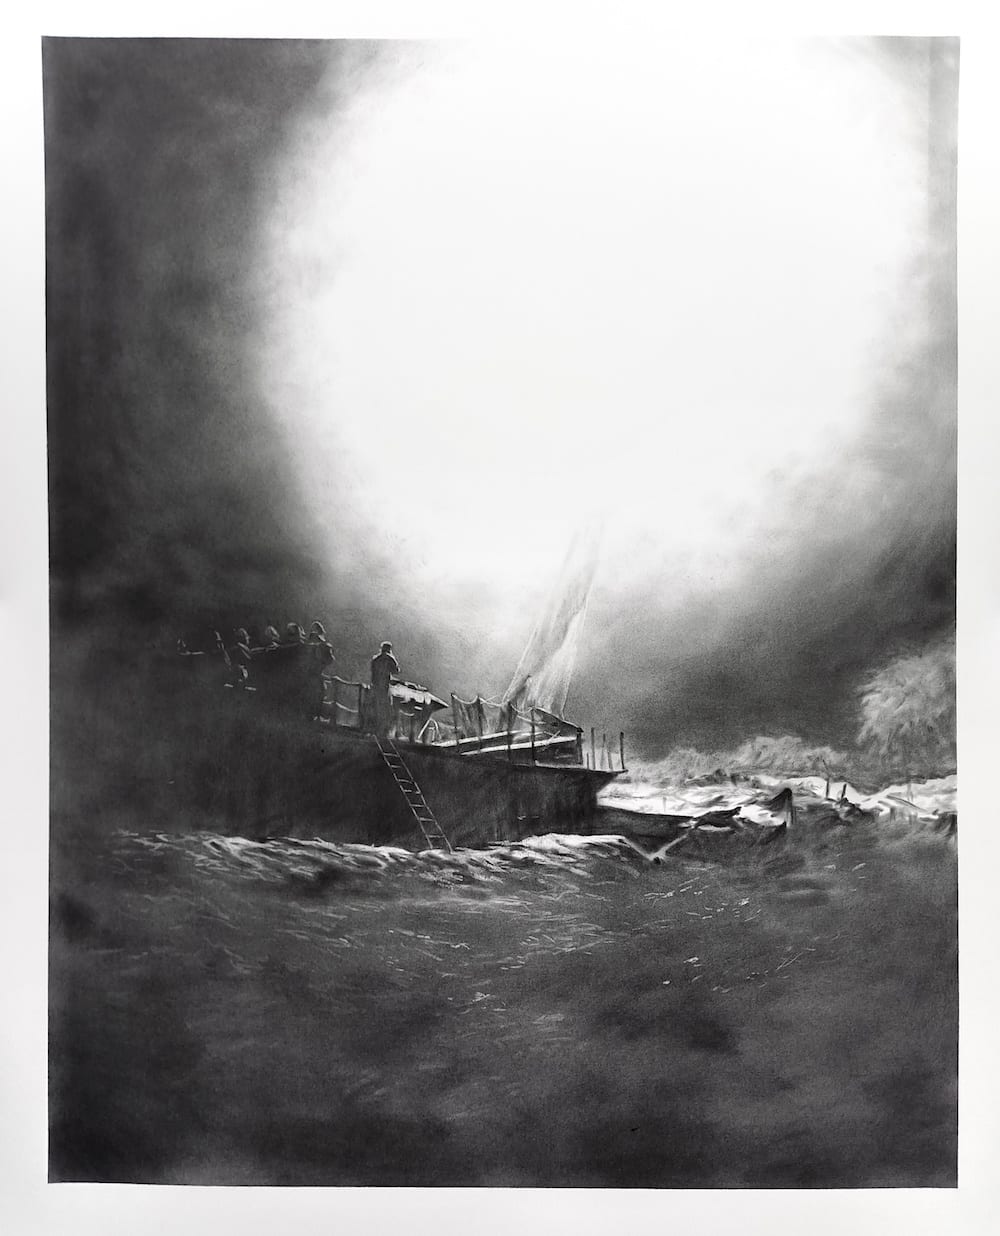 About the Artwork Nidhal Chamekh Bombardement Naval, 2021 Graphite Powder on Paper 130h X 100w Cm  by Nidhal Chamekh